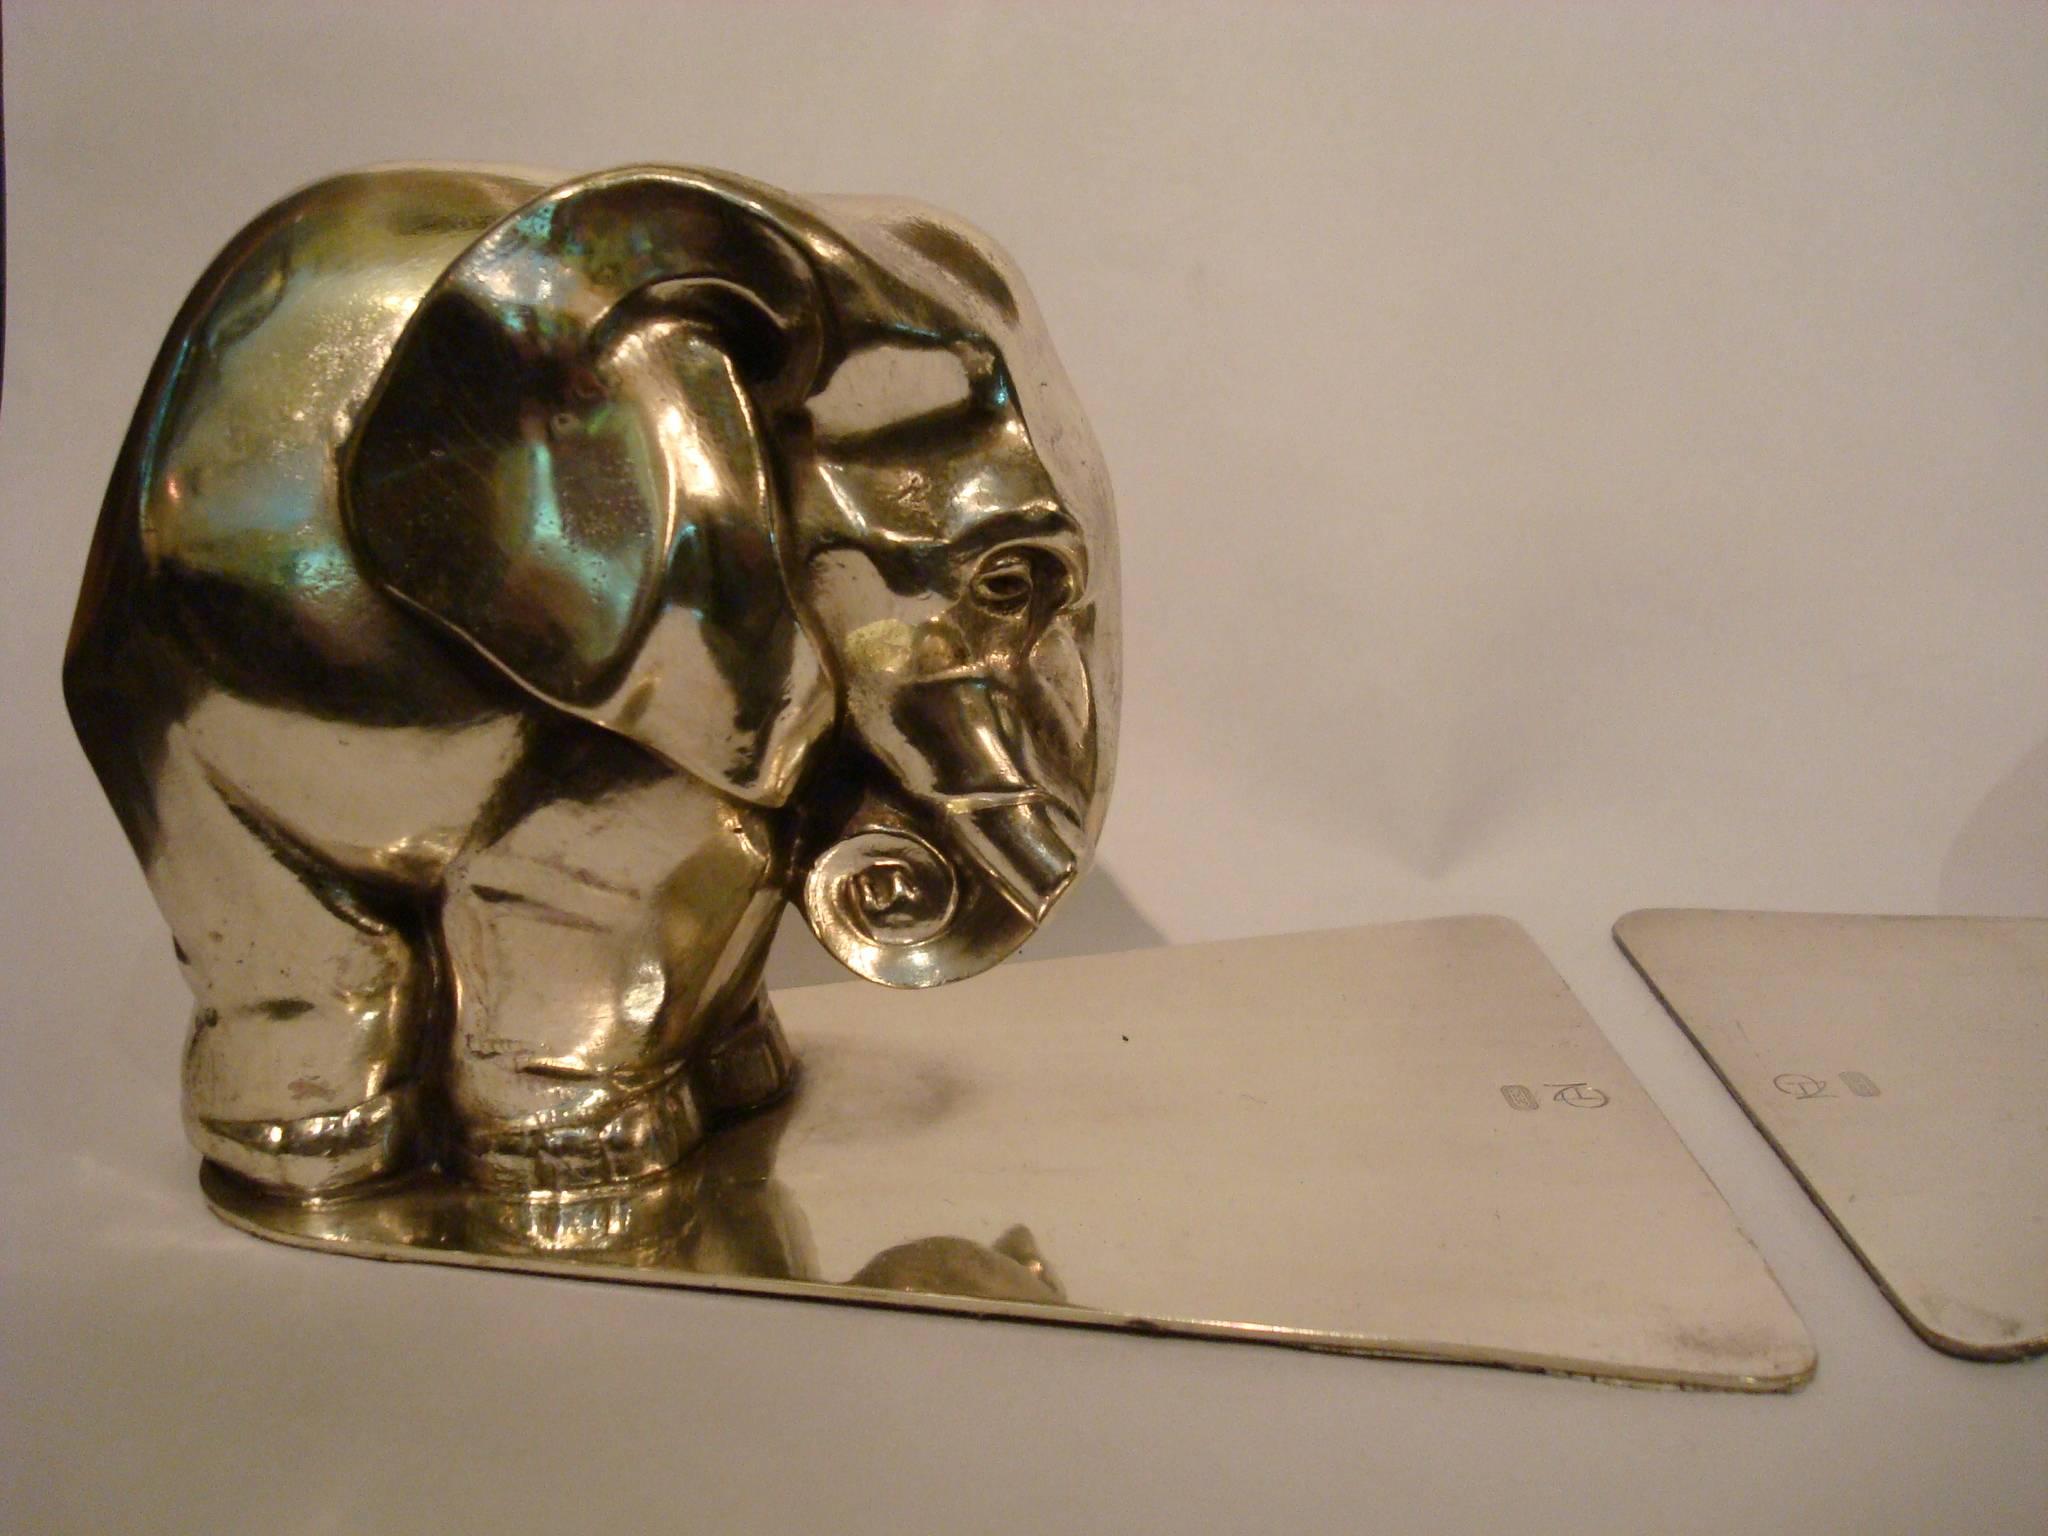 Dutch Pair of Art Deco Elephant Bookends by George Nilsson for Gero Holland